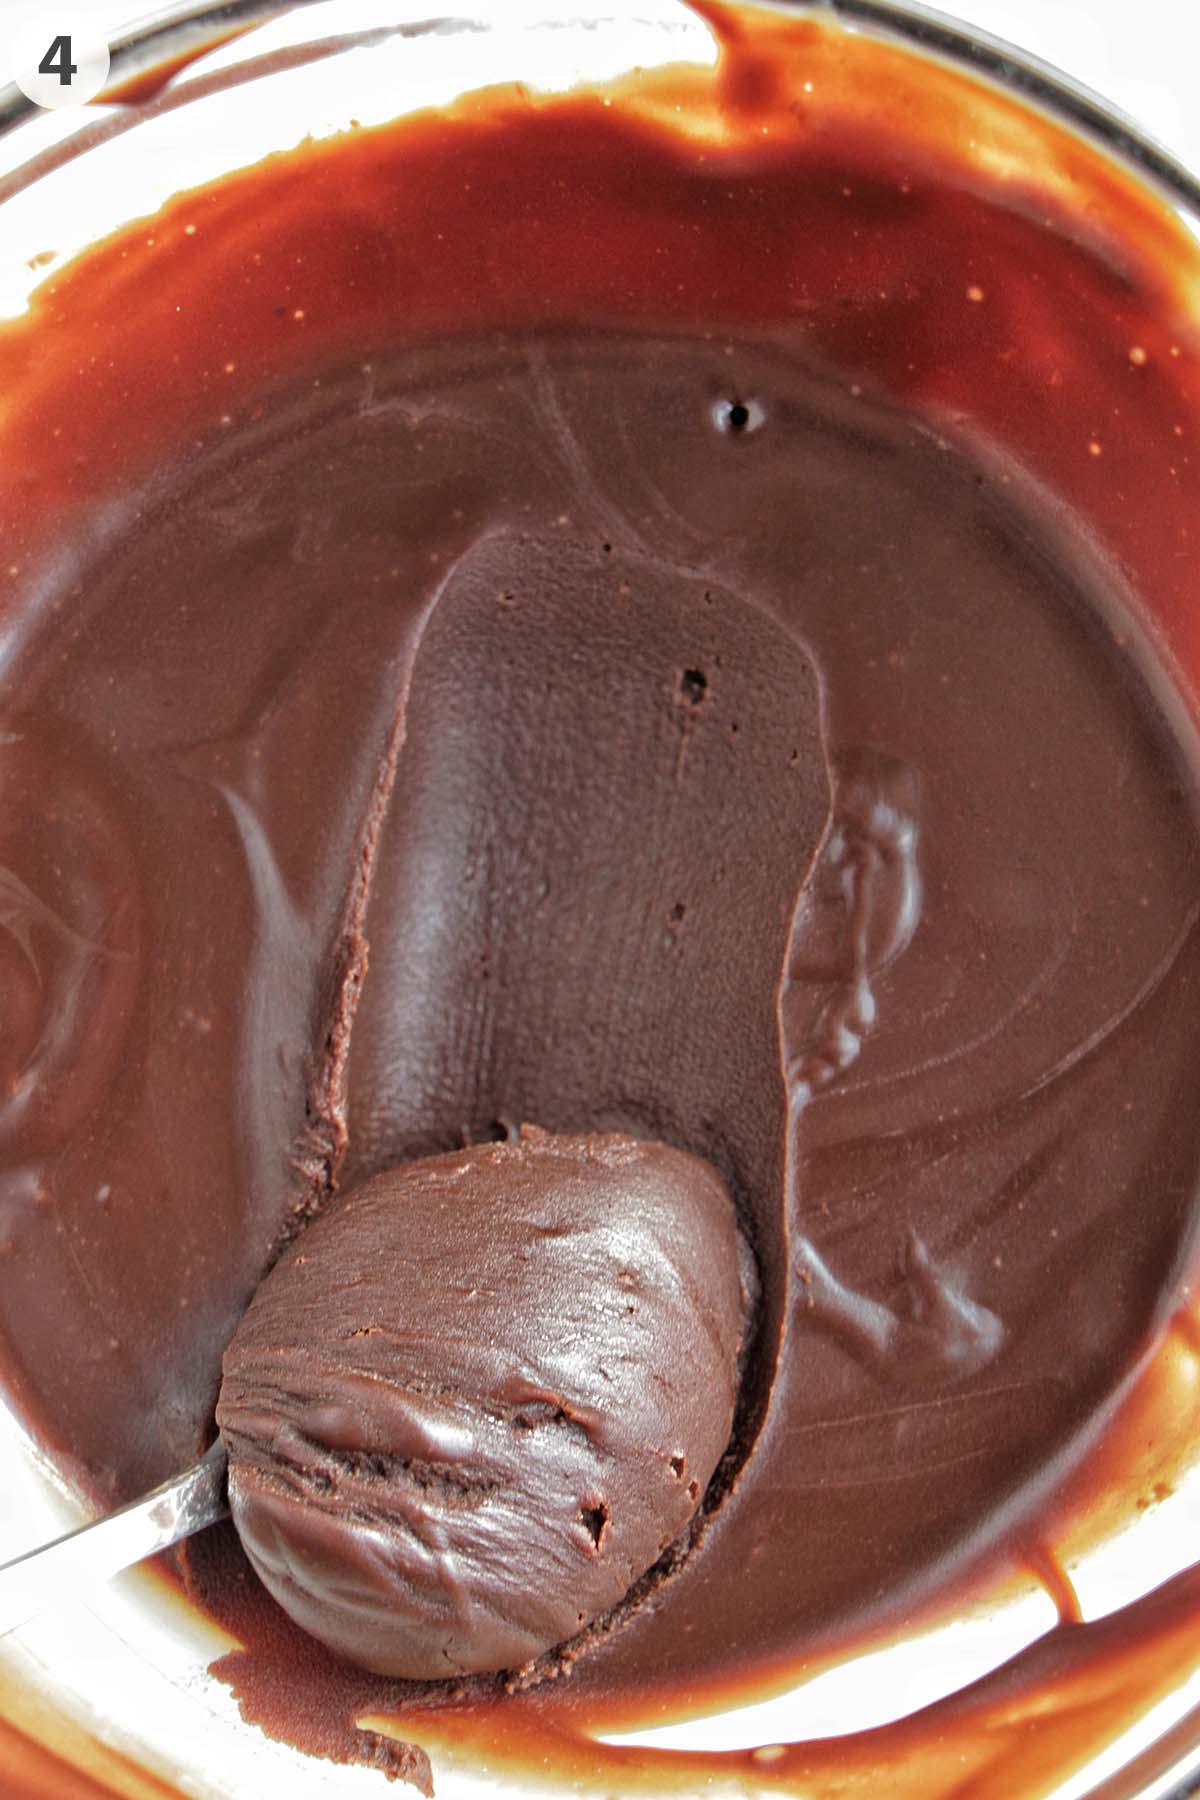 numbered photo showing firmed up ganache in a mixing bowl.